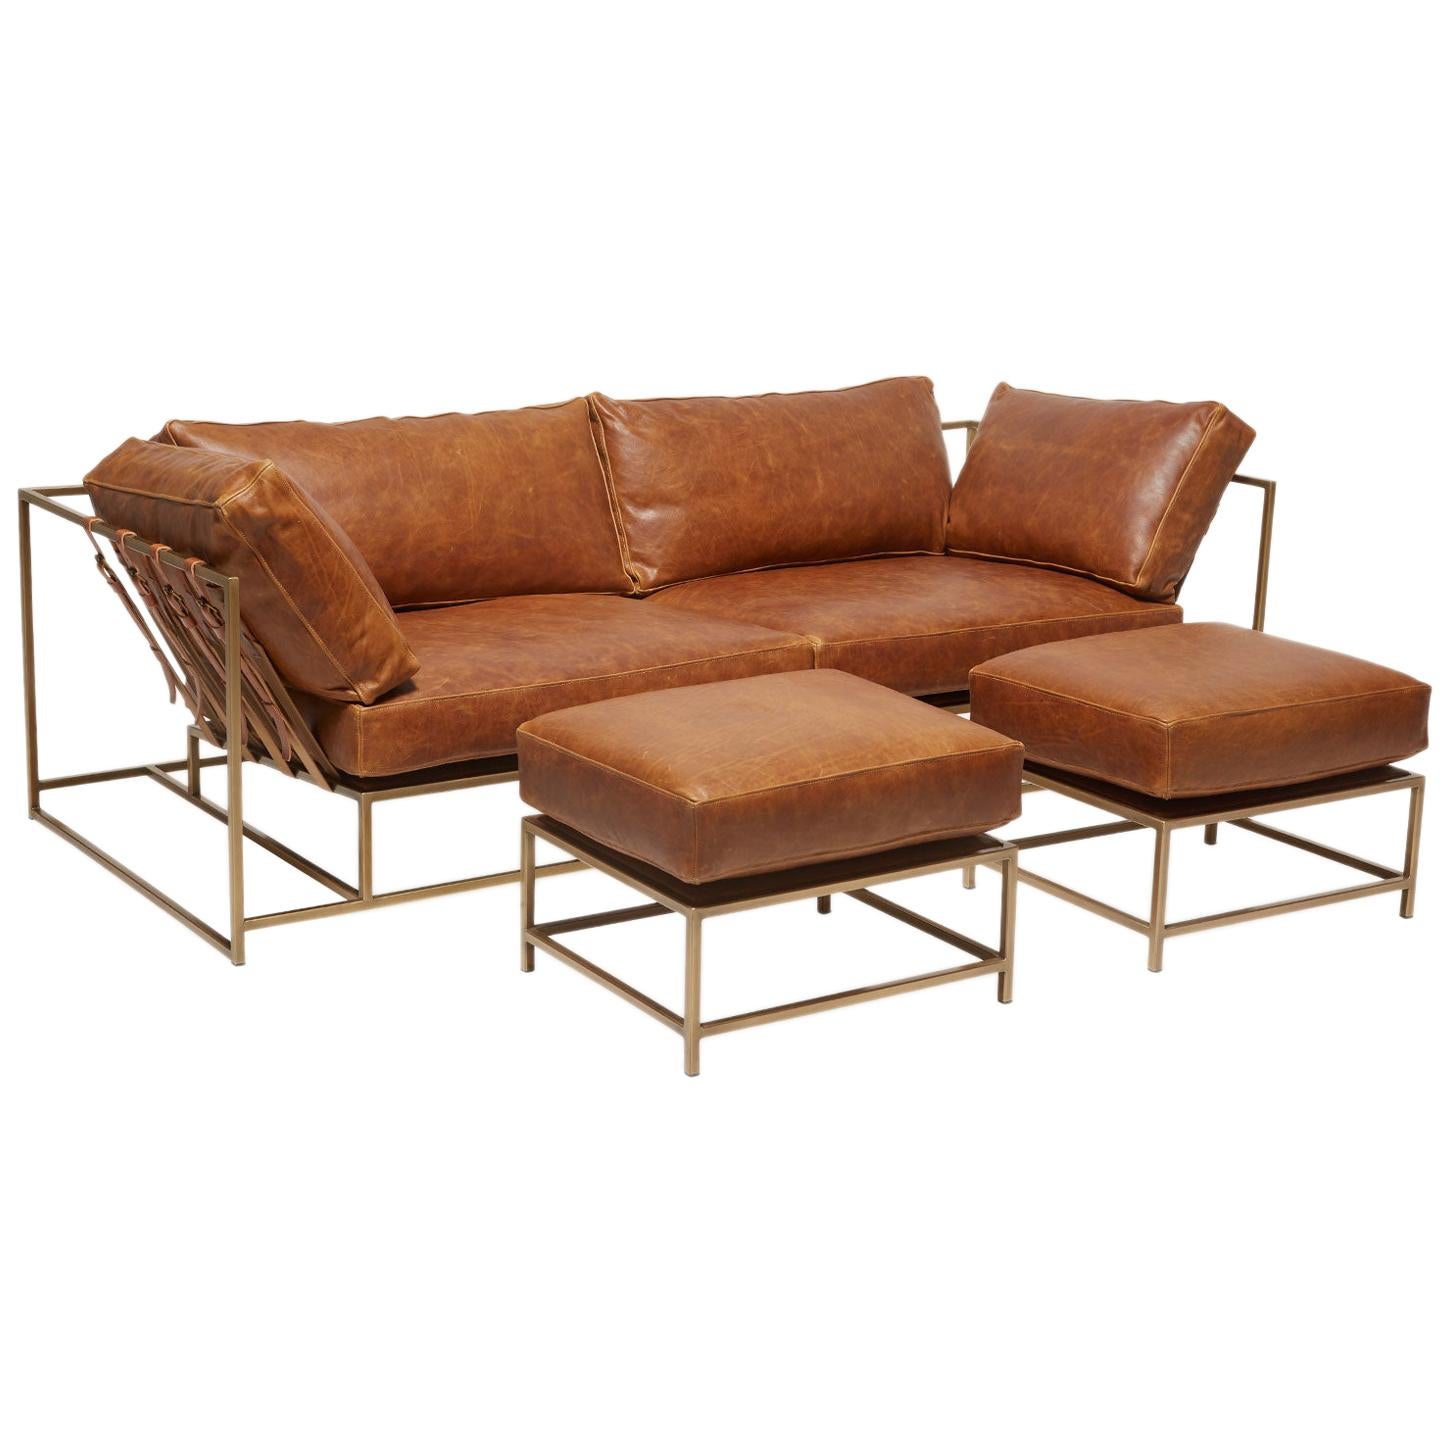 Waxed Potomac Tan Leather and Antique Brass Sofa Set